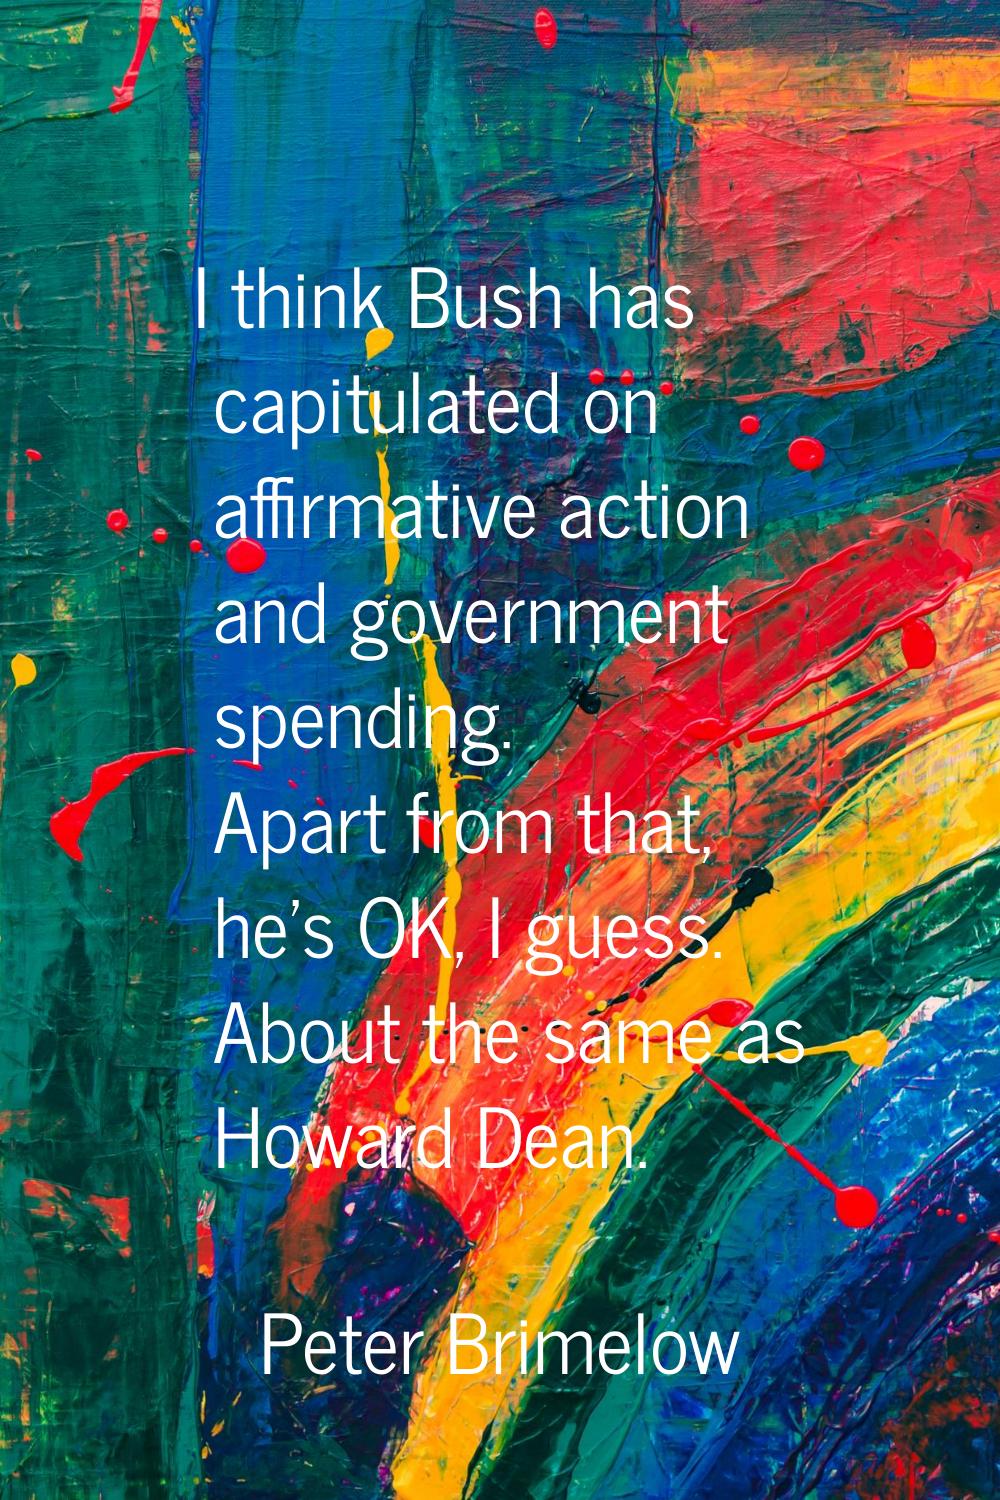 I think Bush has capitulated on affirmative action and government spending. Apart from that, he's O